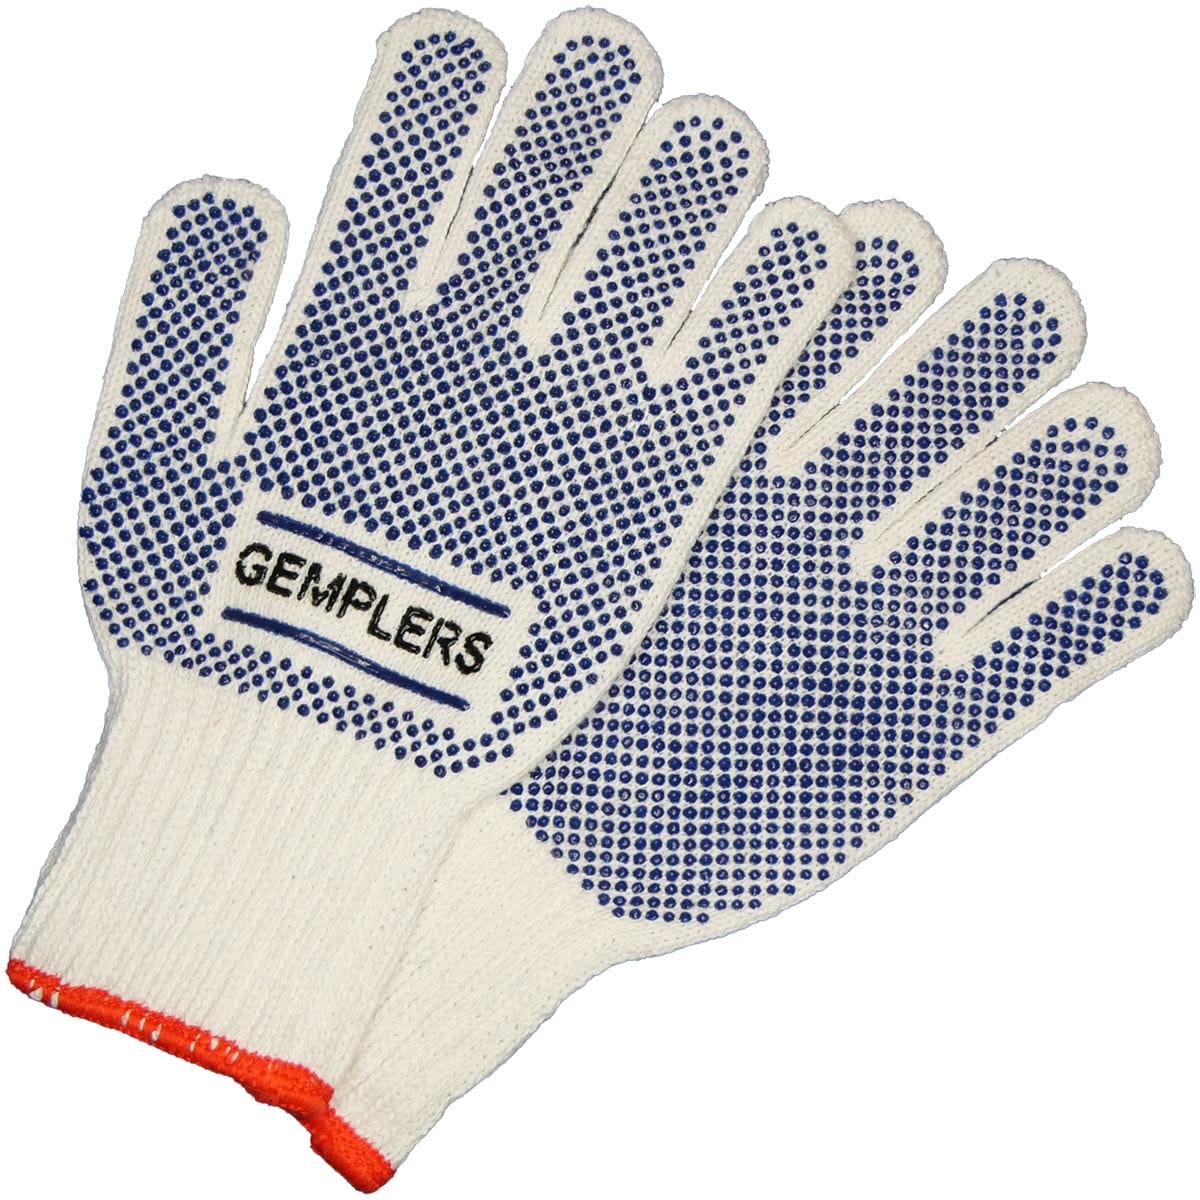 Gemplers Cotton Knit Gloves with Grip Dots |12 Pairs